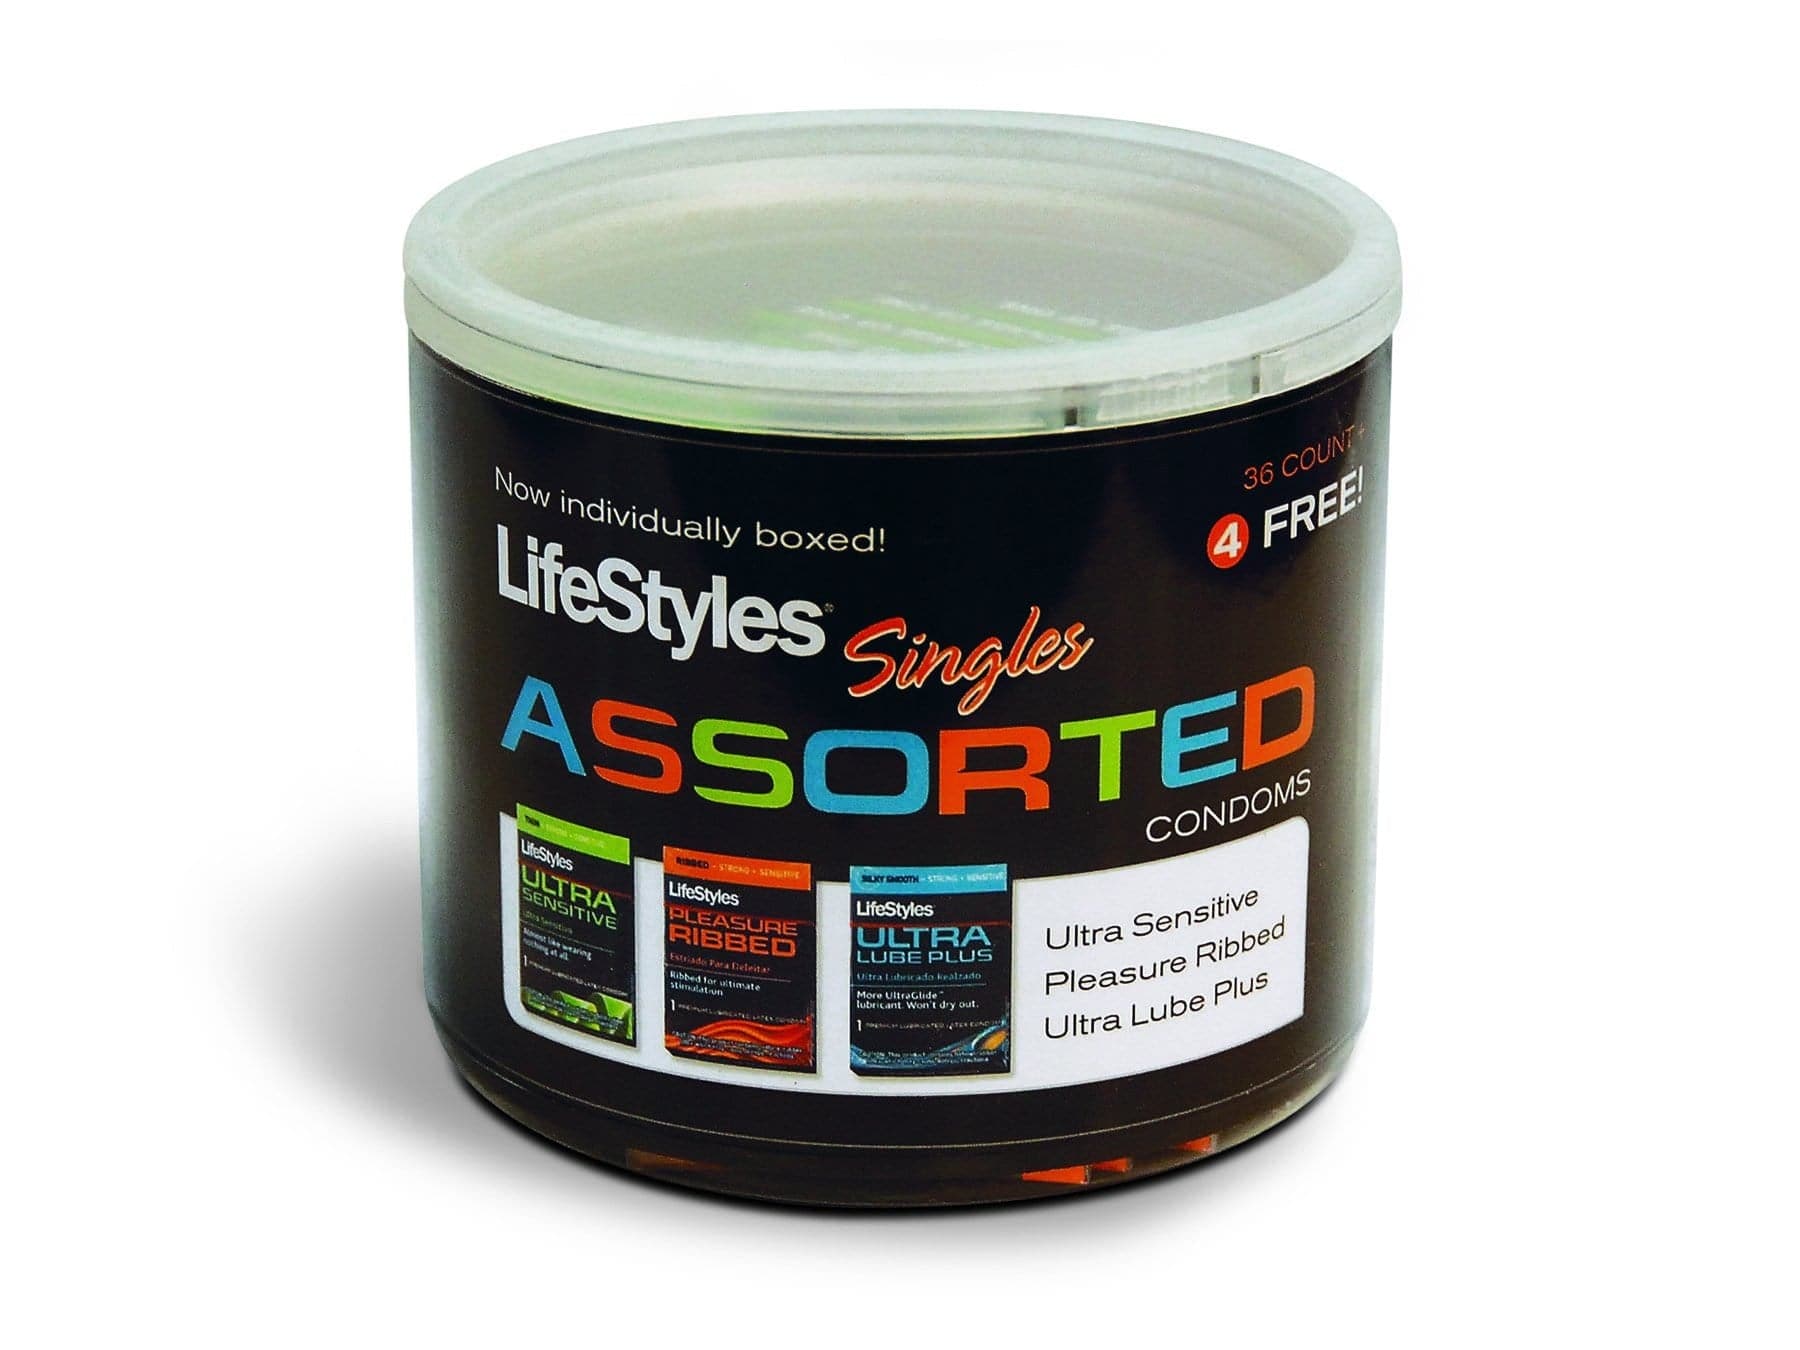 lifestyles assorted singles 40 count jar